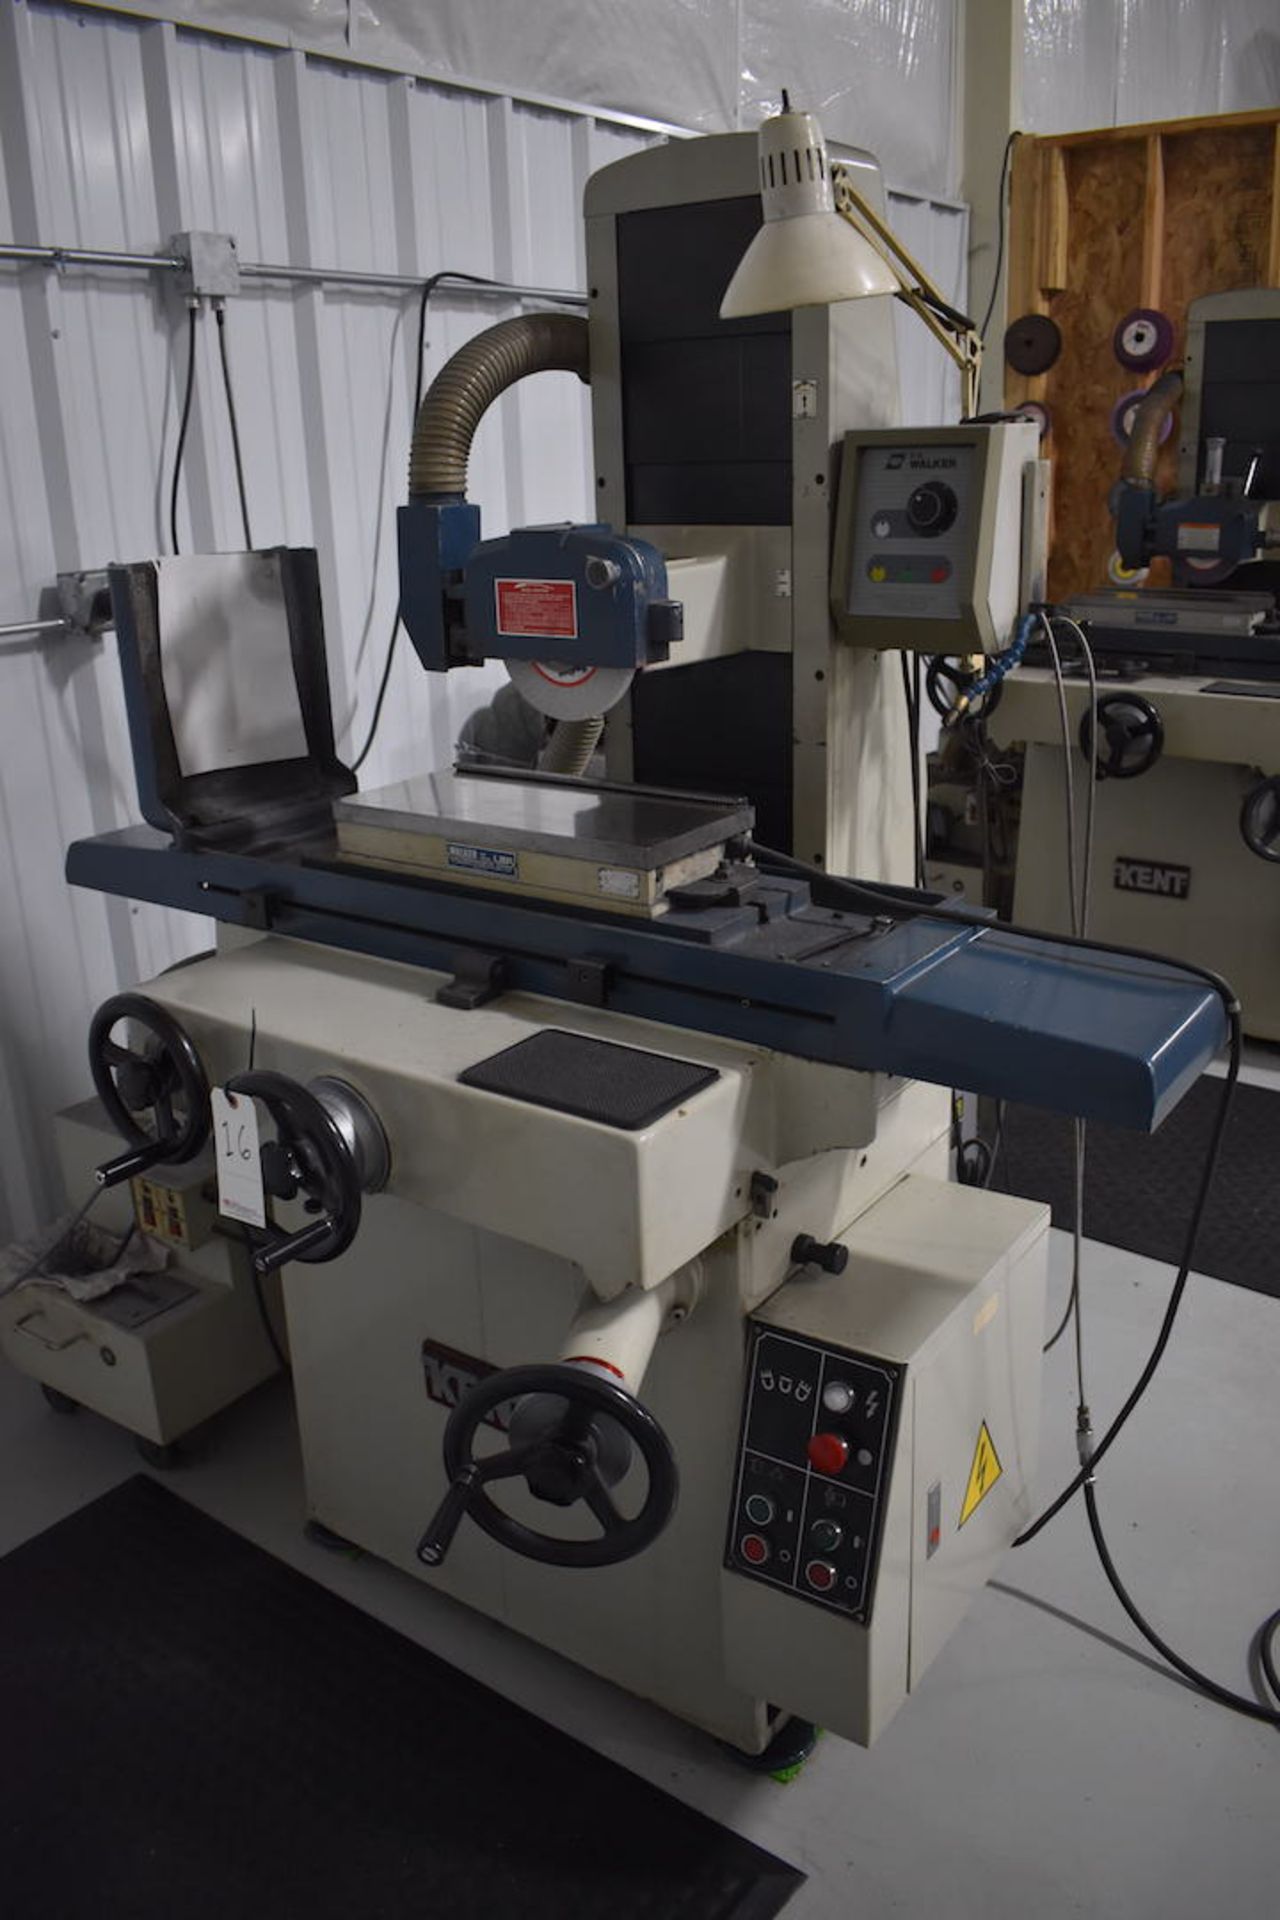 KENT 8” X 18” MODEL KGS-250 HAND FEED SURFACE GRINDER: S/N 94125008 (1994); 2HP MOTOR ON SPINDLE;